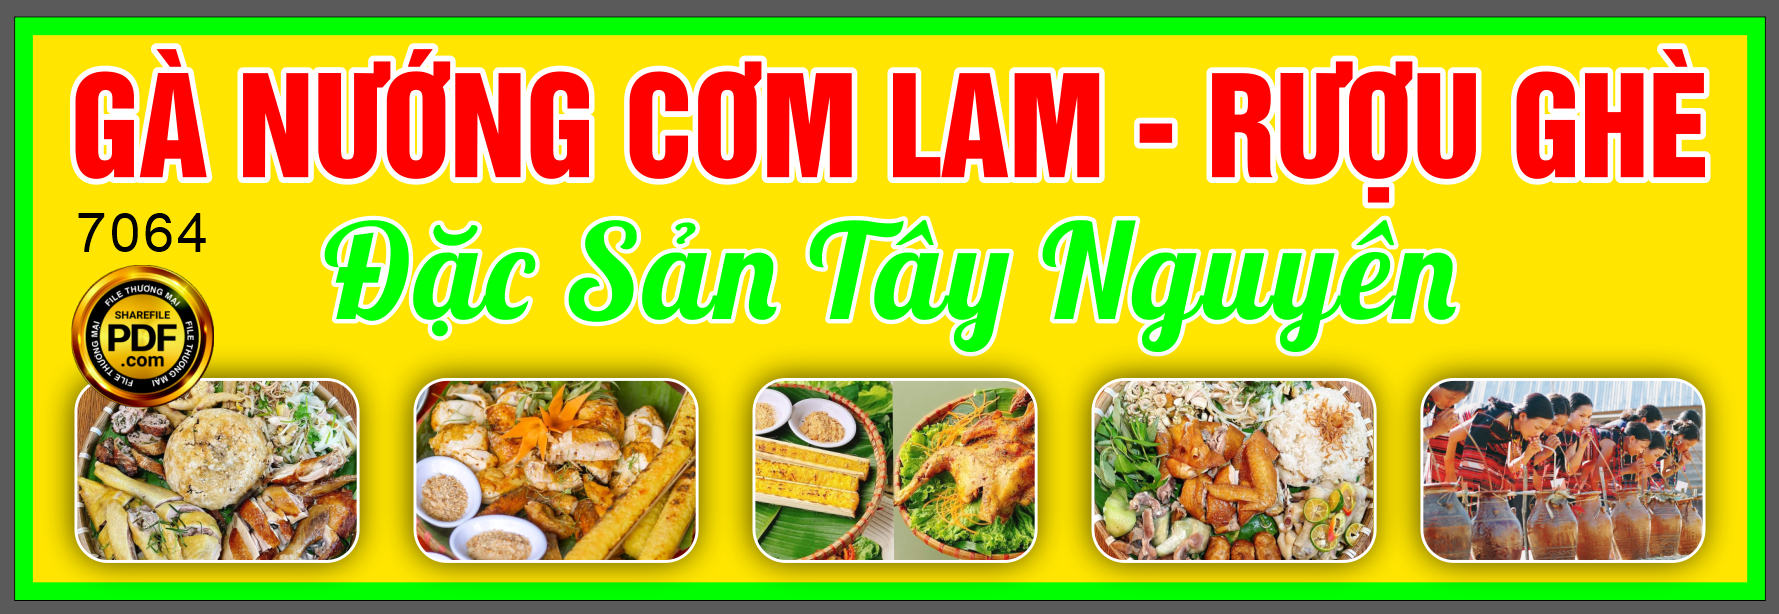 ga nuong cam lam - ruou che.png